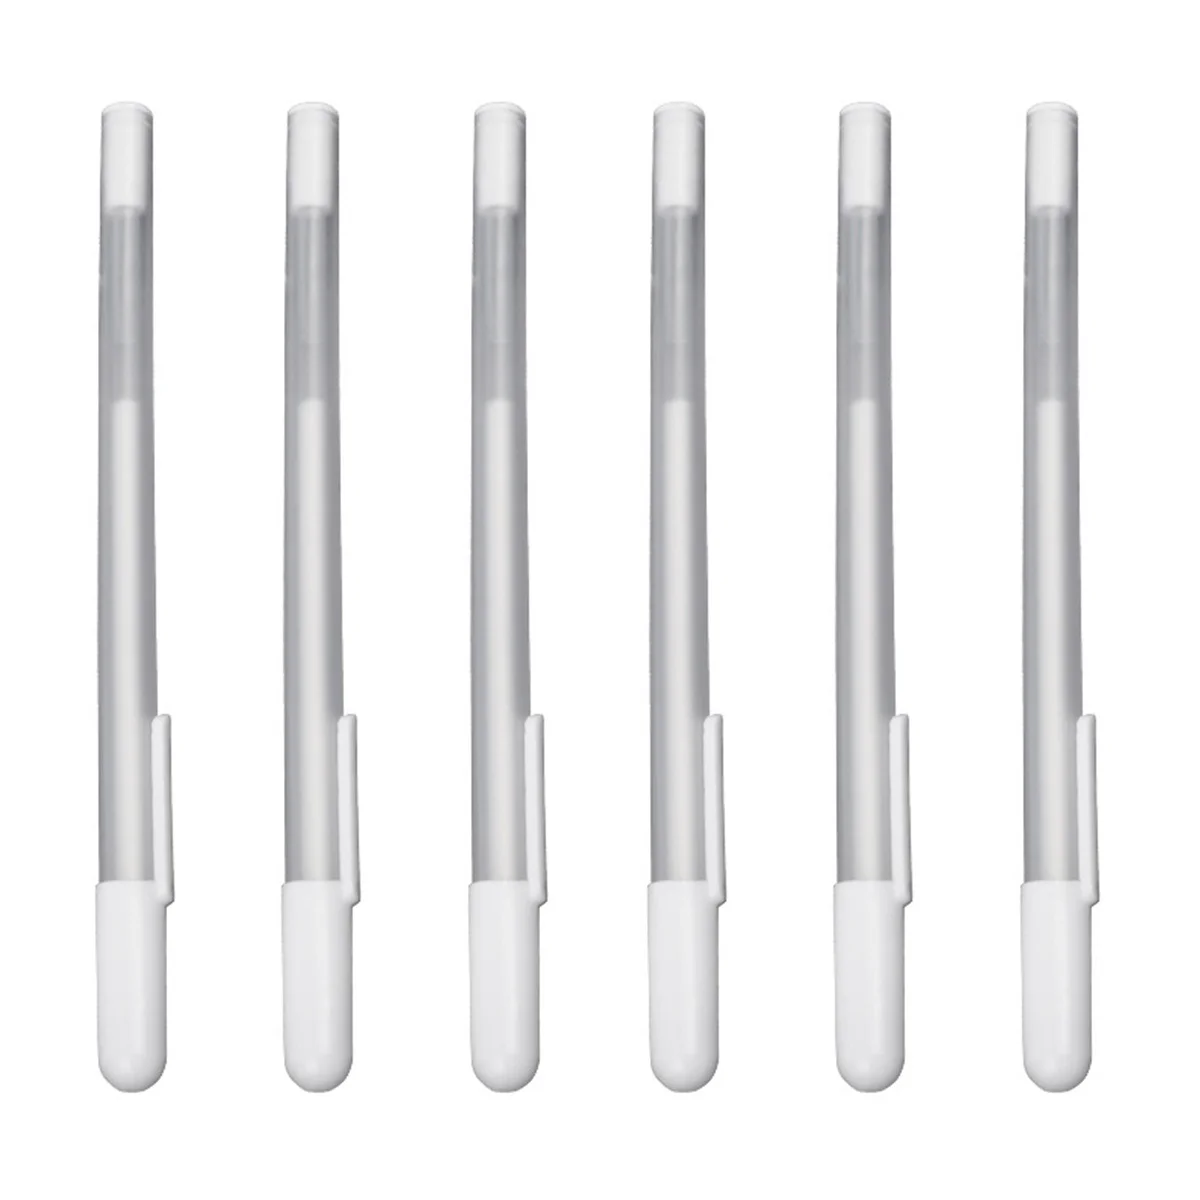 

6 Pcs Skin Marker Tattooing Pen Microblading Marking Pens Tattoos Position Tip Markers Tool Eyebrow Positioning